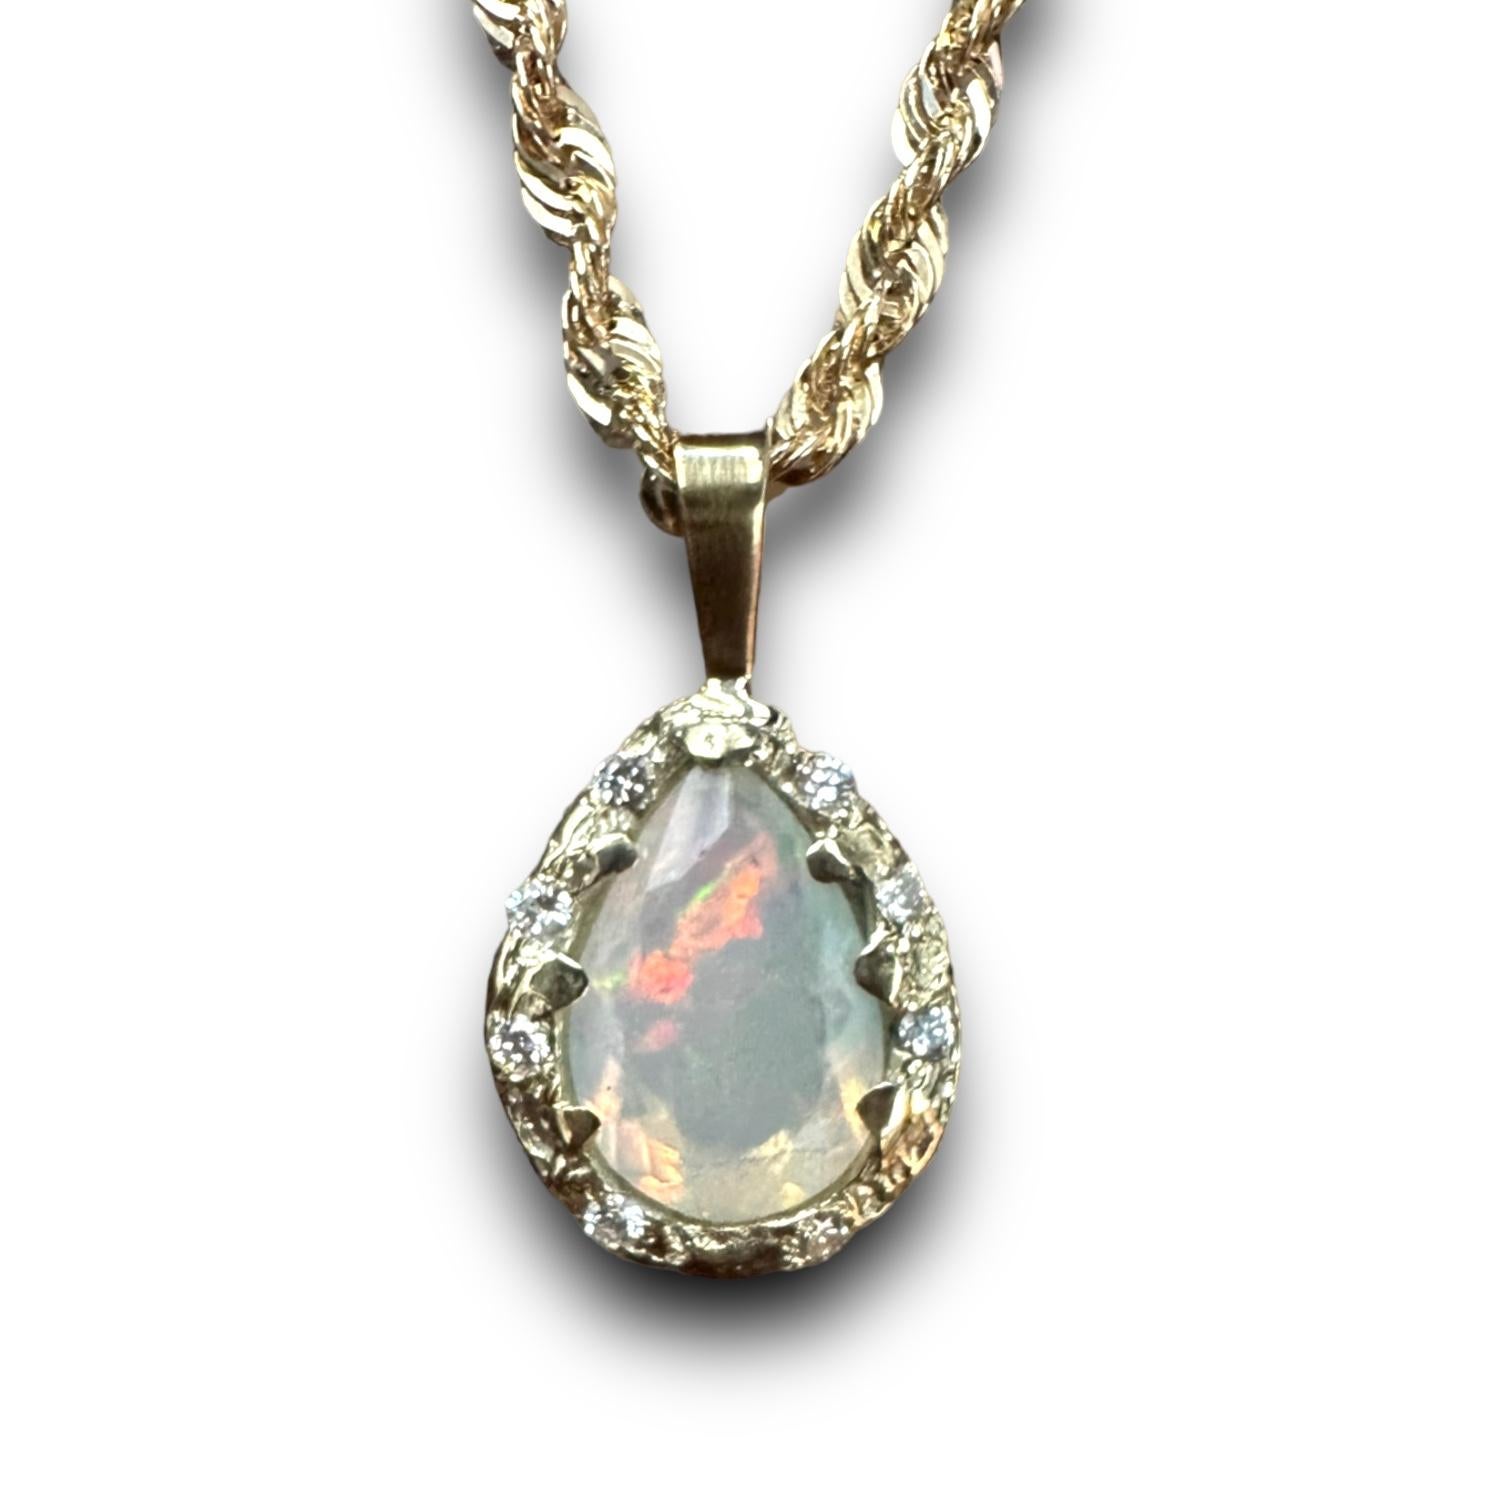 Introducing Iris our one-of-a-kind Magical Opal Drop Rope Necklace with diamonds in 14k Yellow Gold! This exquisite piece of jewelry is sure to catch everyone's attention with its mesmerizing beauty. The necklace features a stunning opal drop that